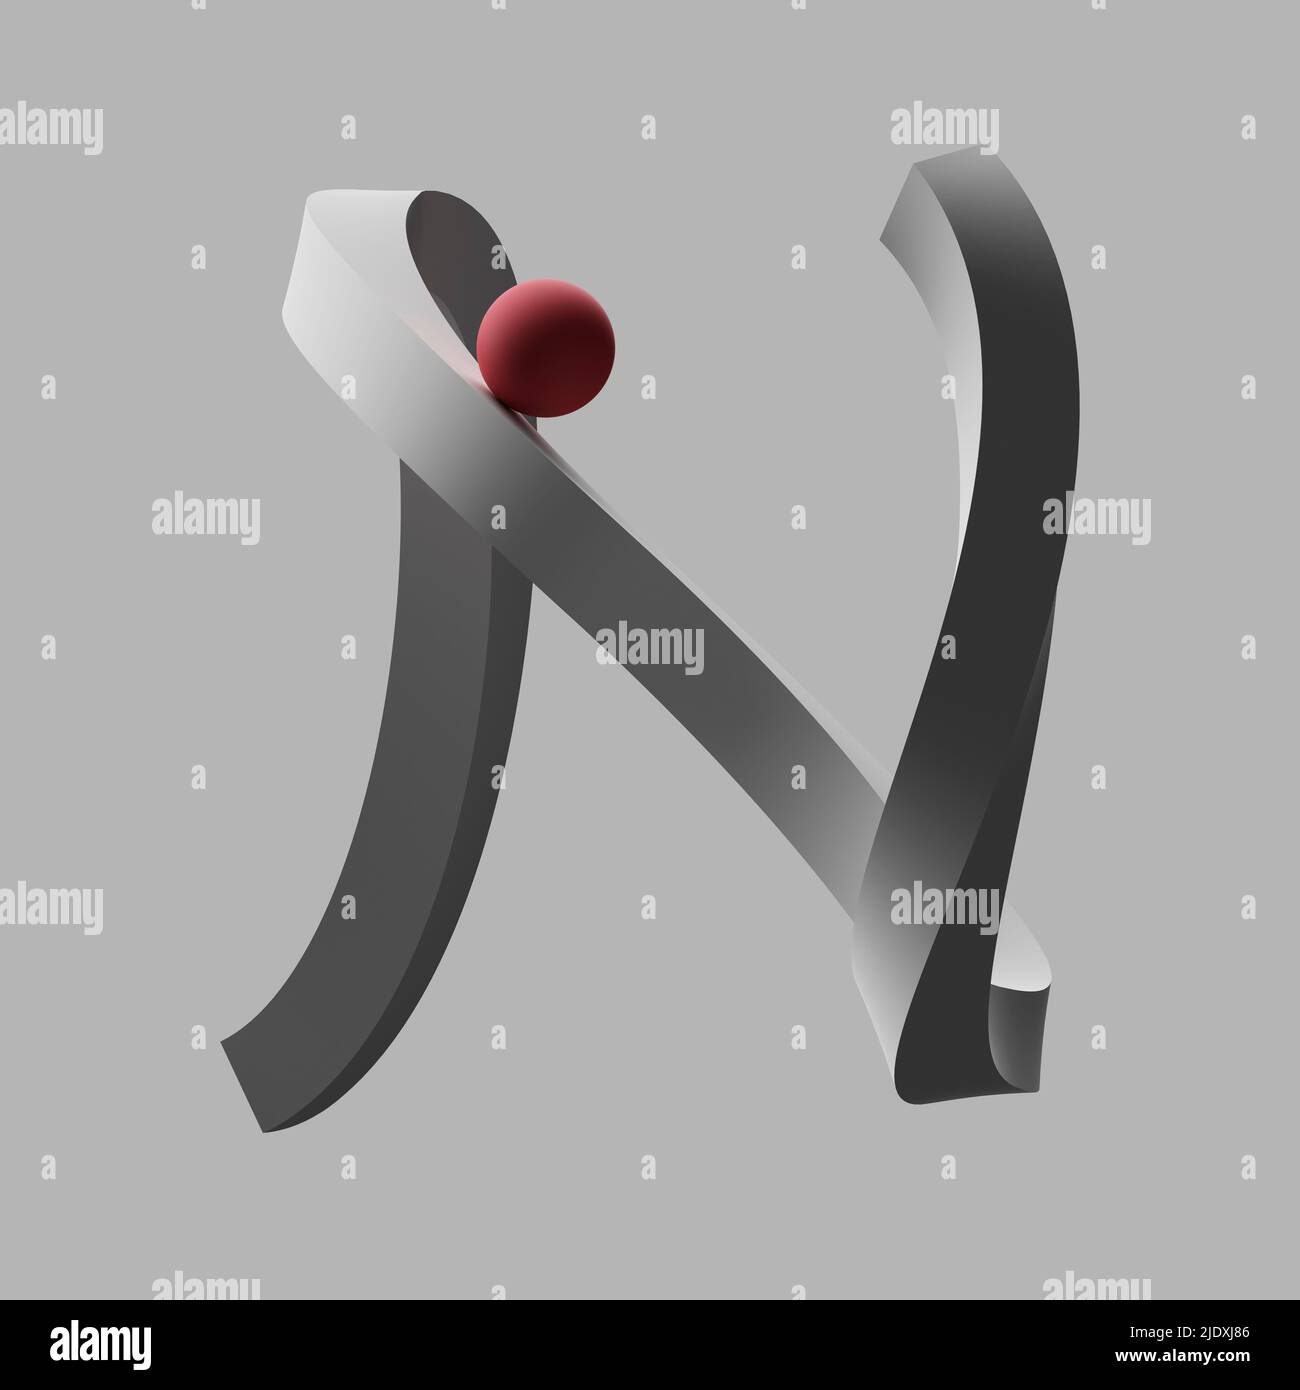 Three dimensional render of red sphere balancing on letter N Stock Photo